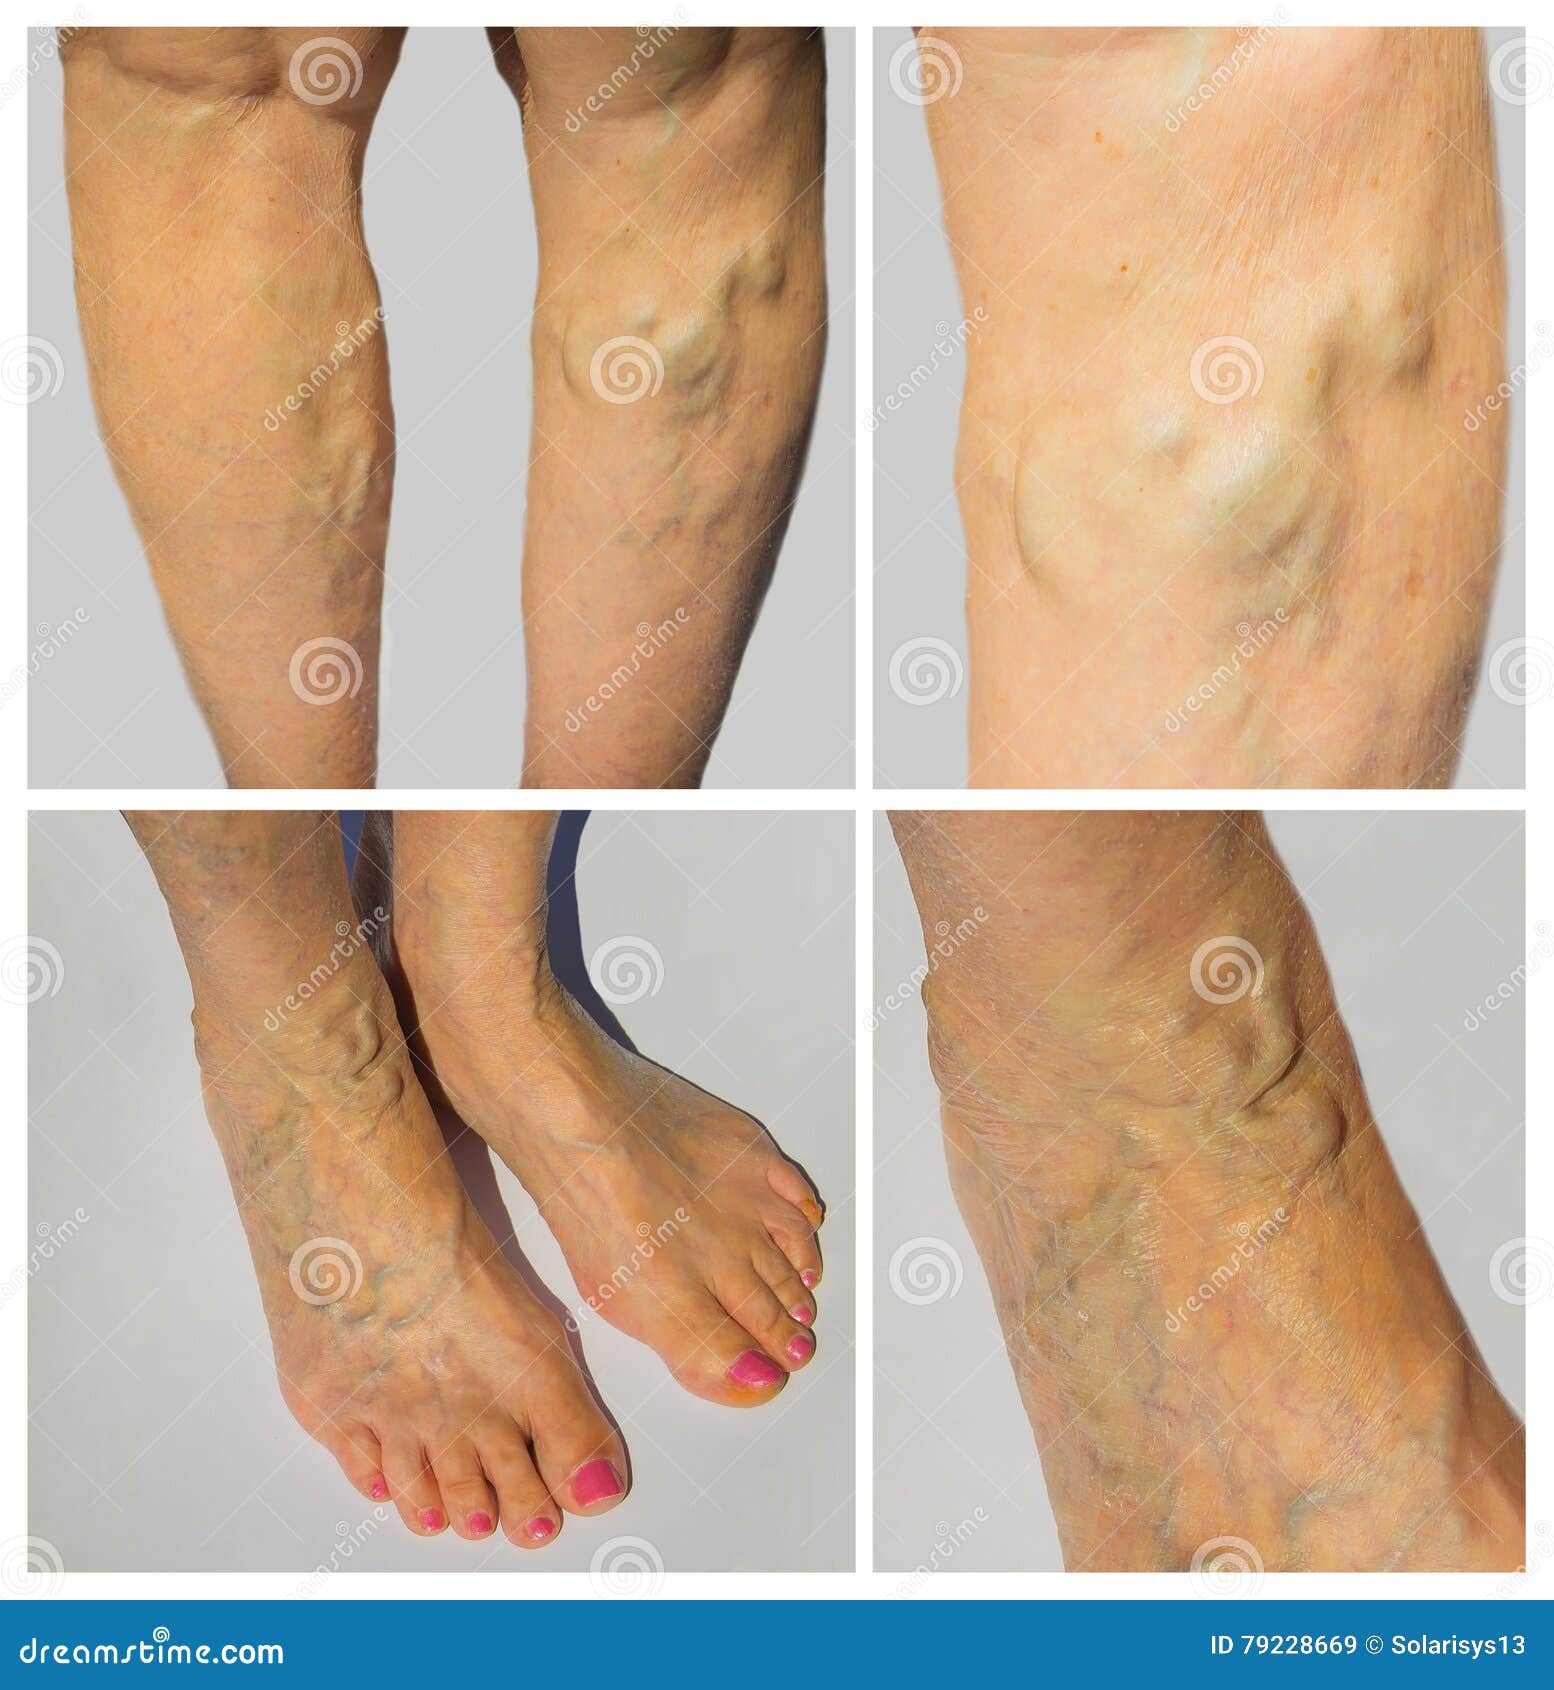 Varicose Veins on a Female Legs Stock Image - Image of care, issue: 79228669